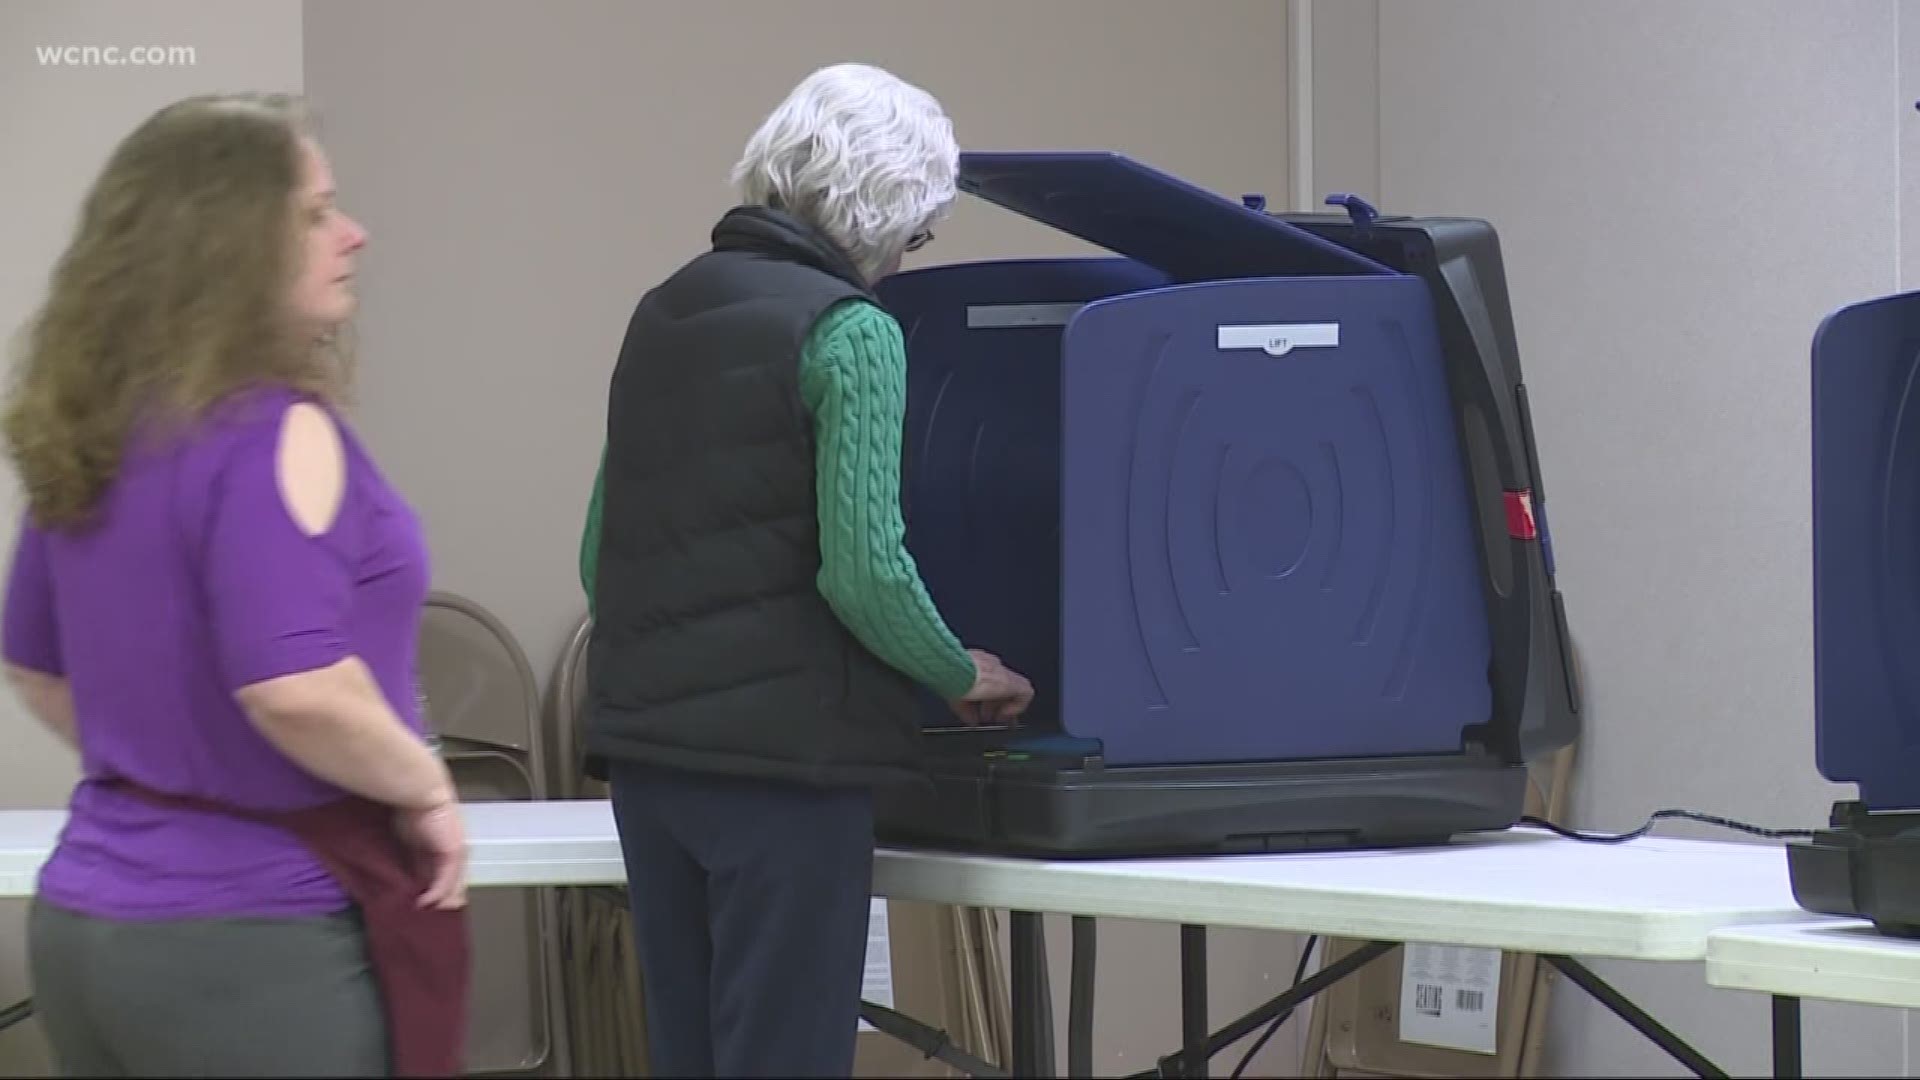 Decision 2018 is just around the corner but Lancaster County officials say they don't have enough voting machines for the upcoming elections.